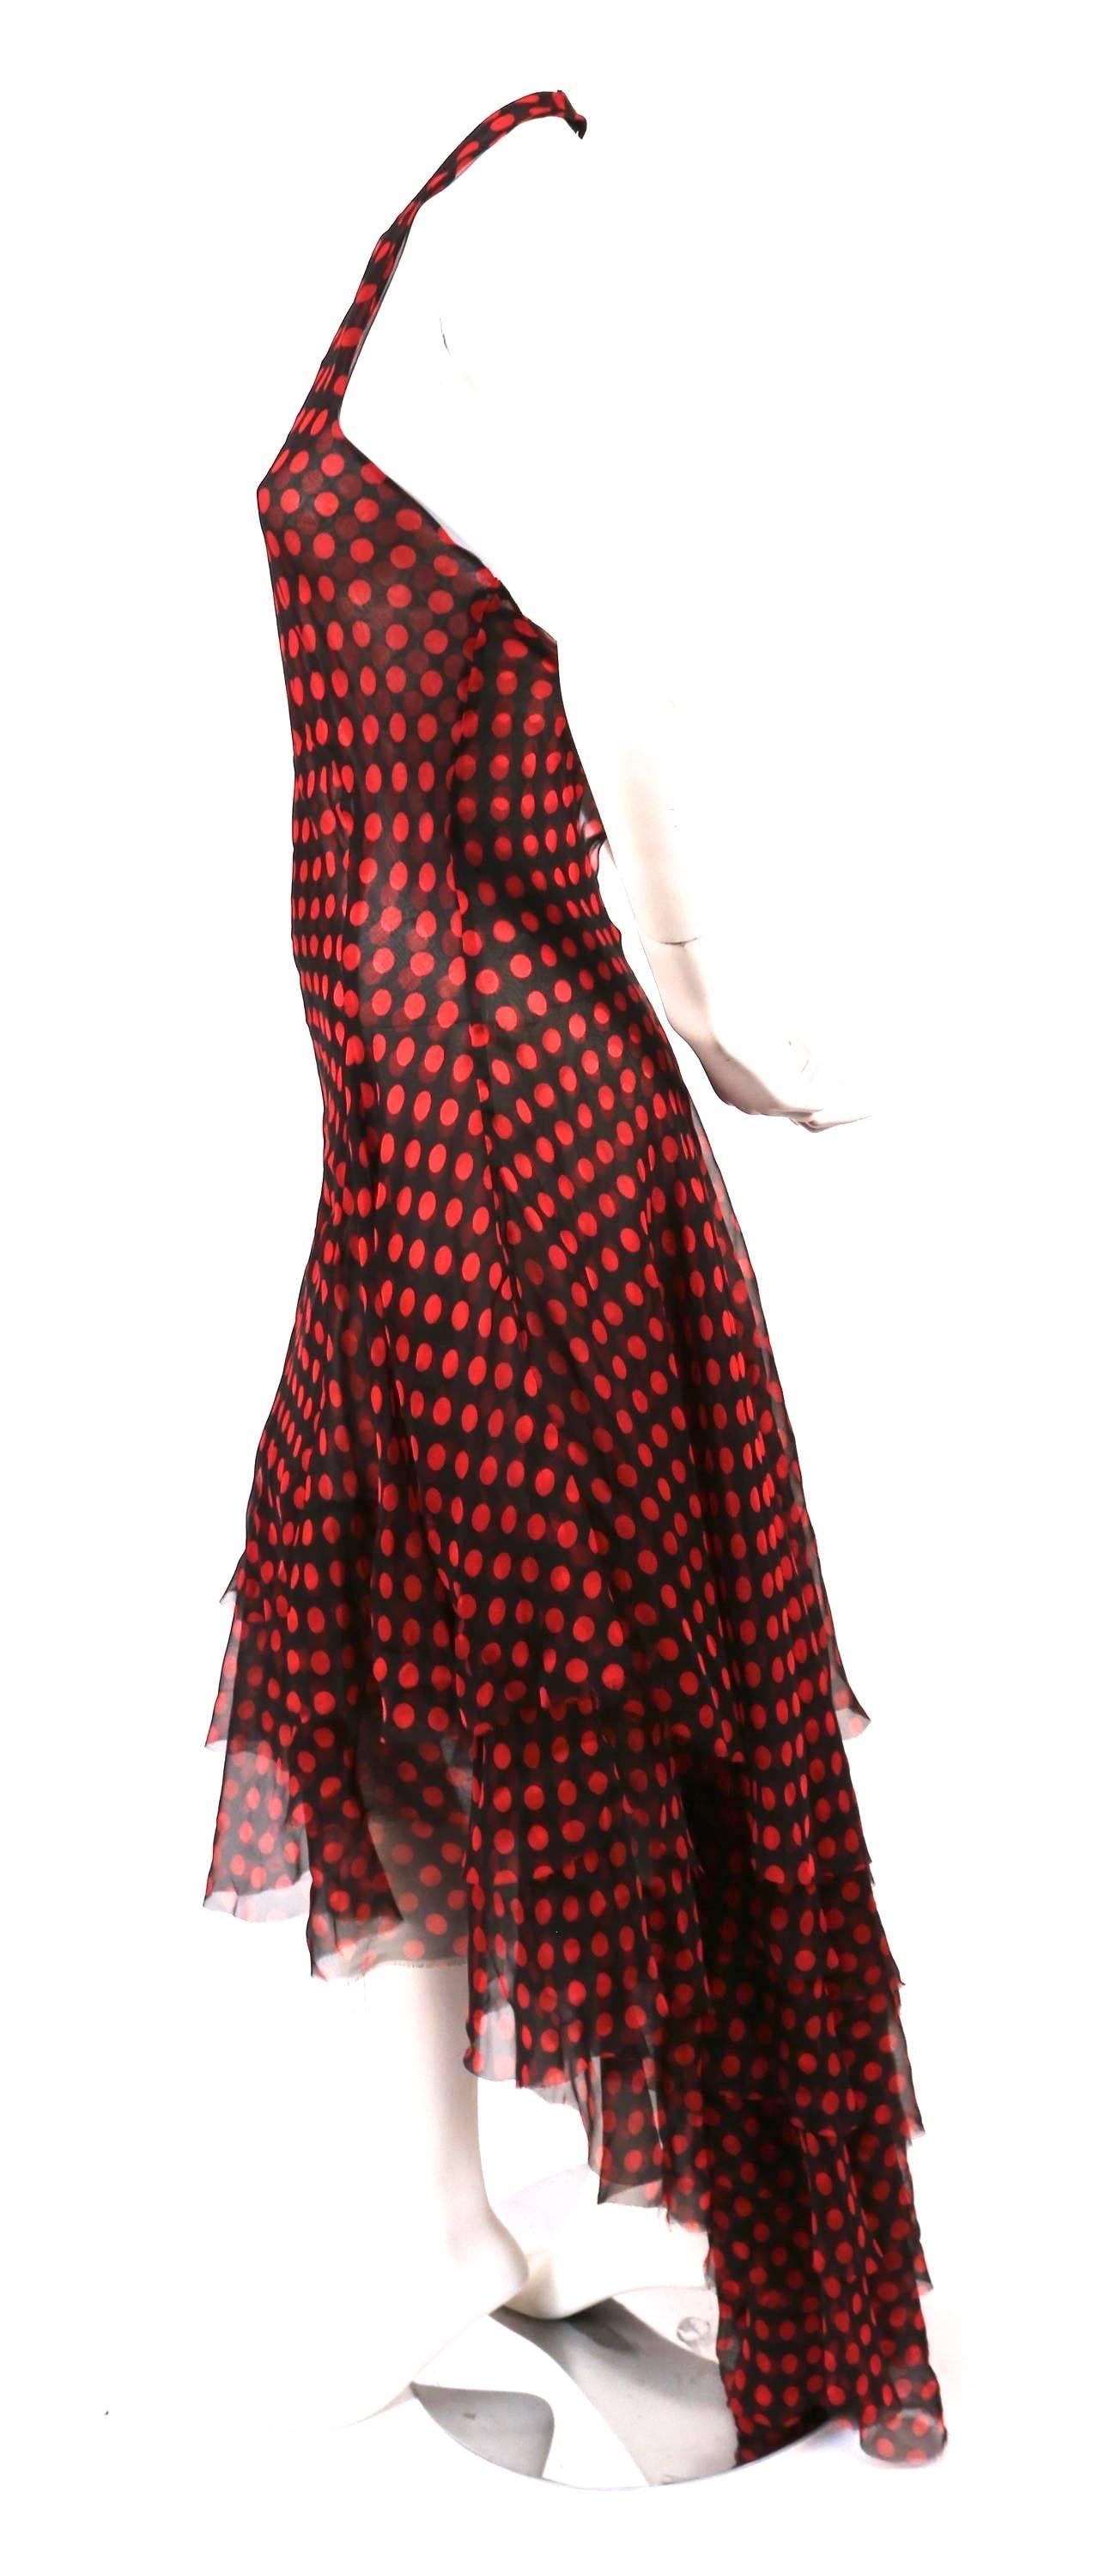 Black 2003 ALEXANDER MCQUEEN black tiered RUNWAY gown with red polka dots